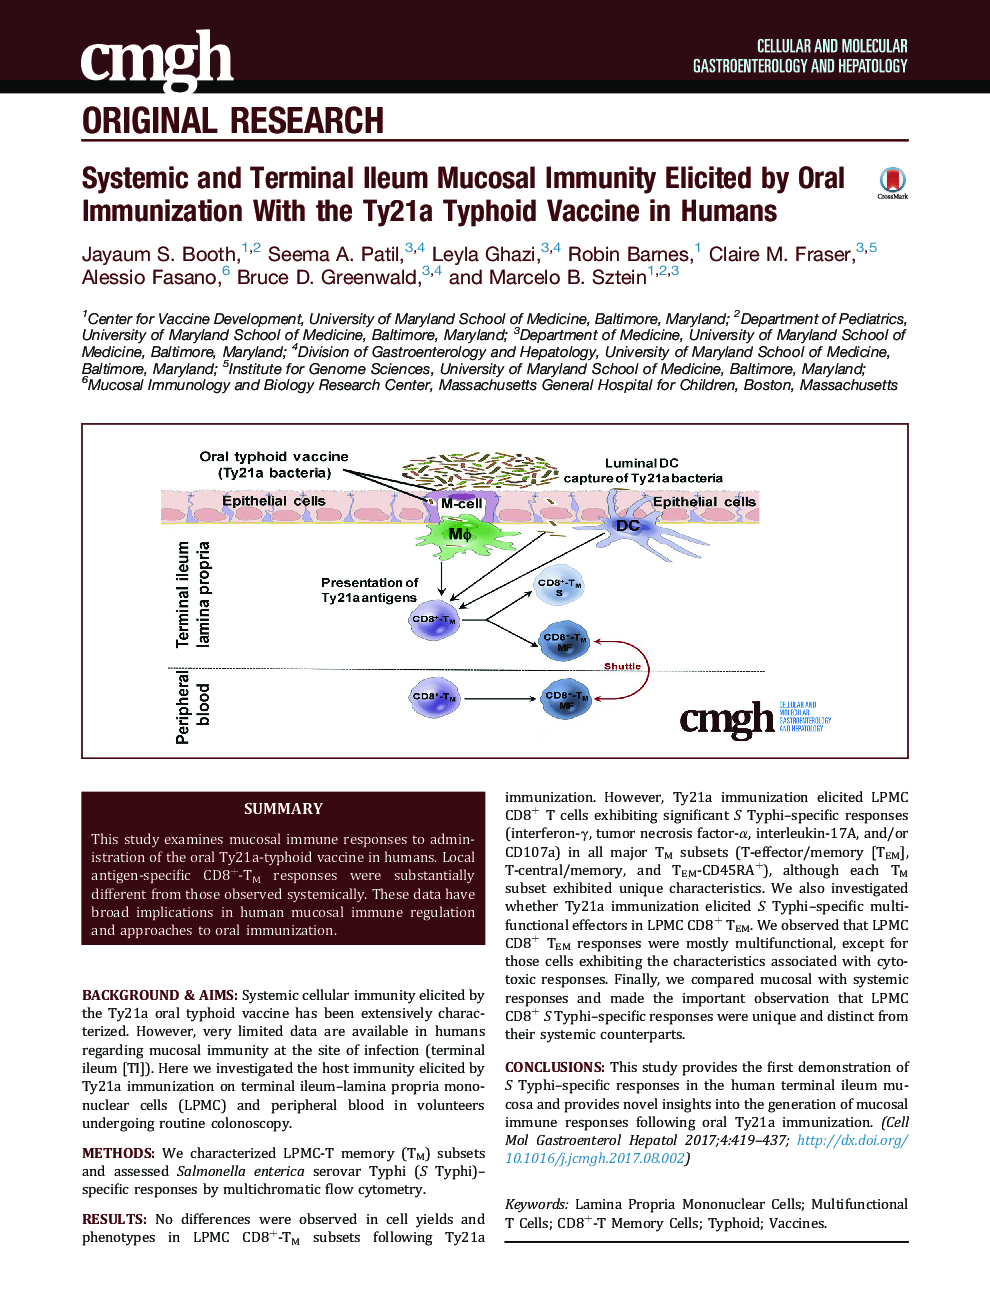 Systemic and Terminal Ileum Mucosal Immunity Elicited by Oral Immunization With the Ty21a Typhoid Vaccine in Humans